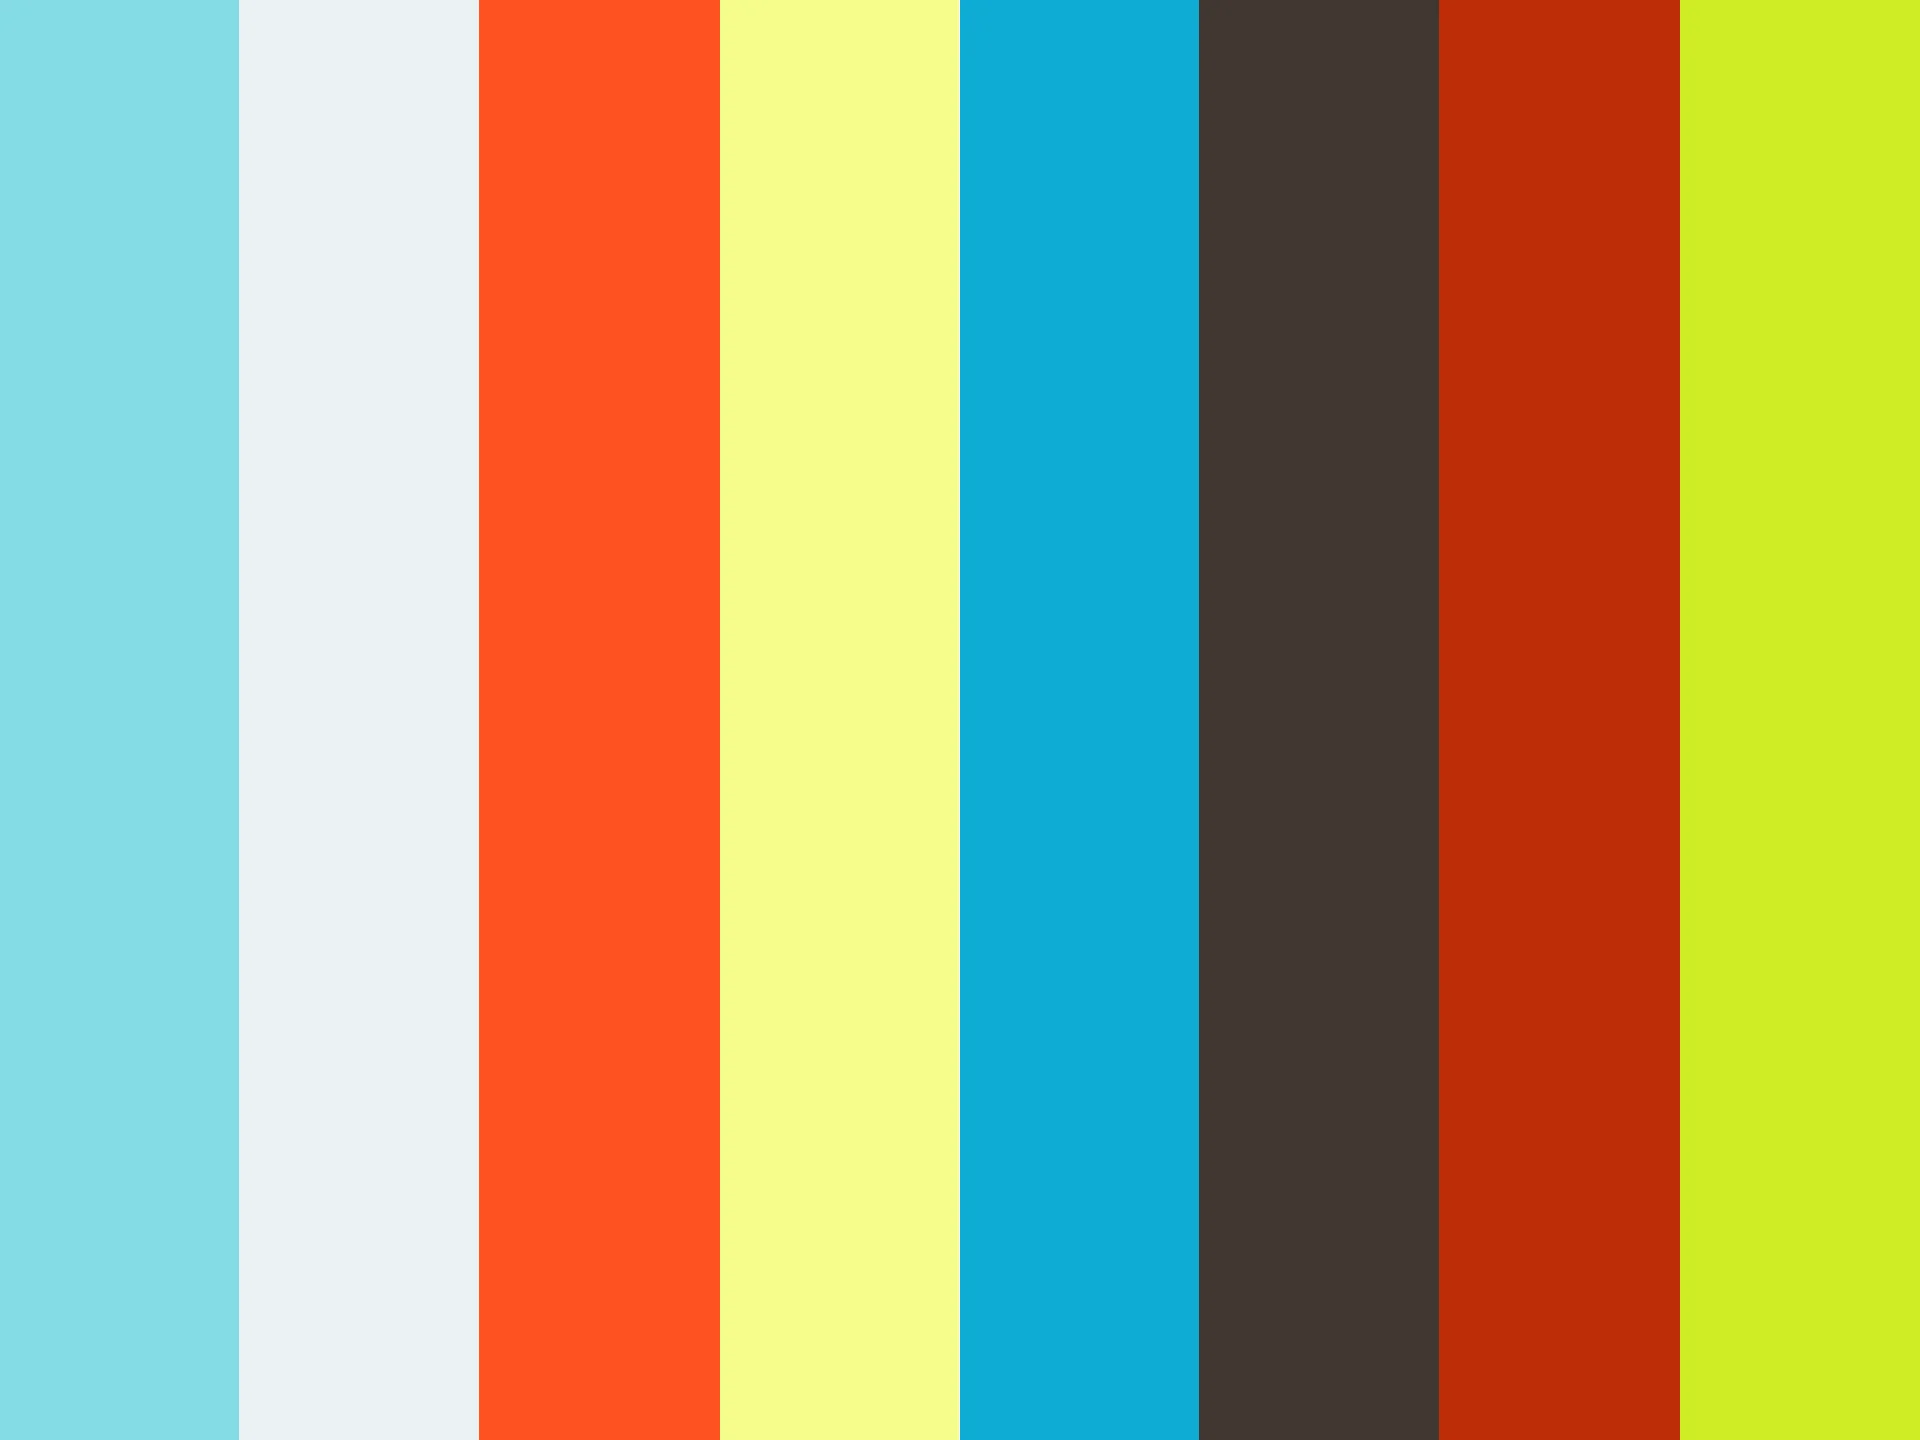 Roid Test Color Chart